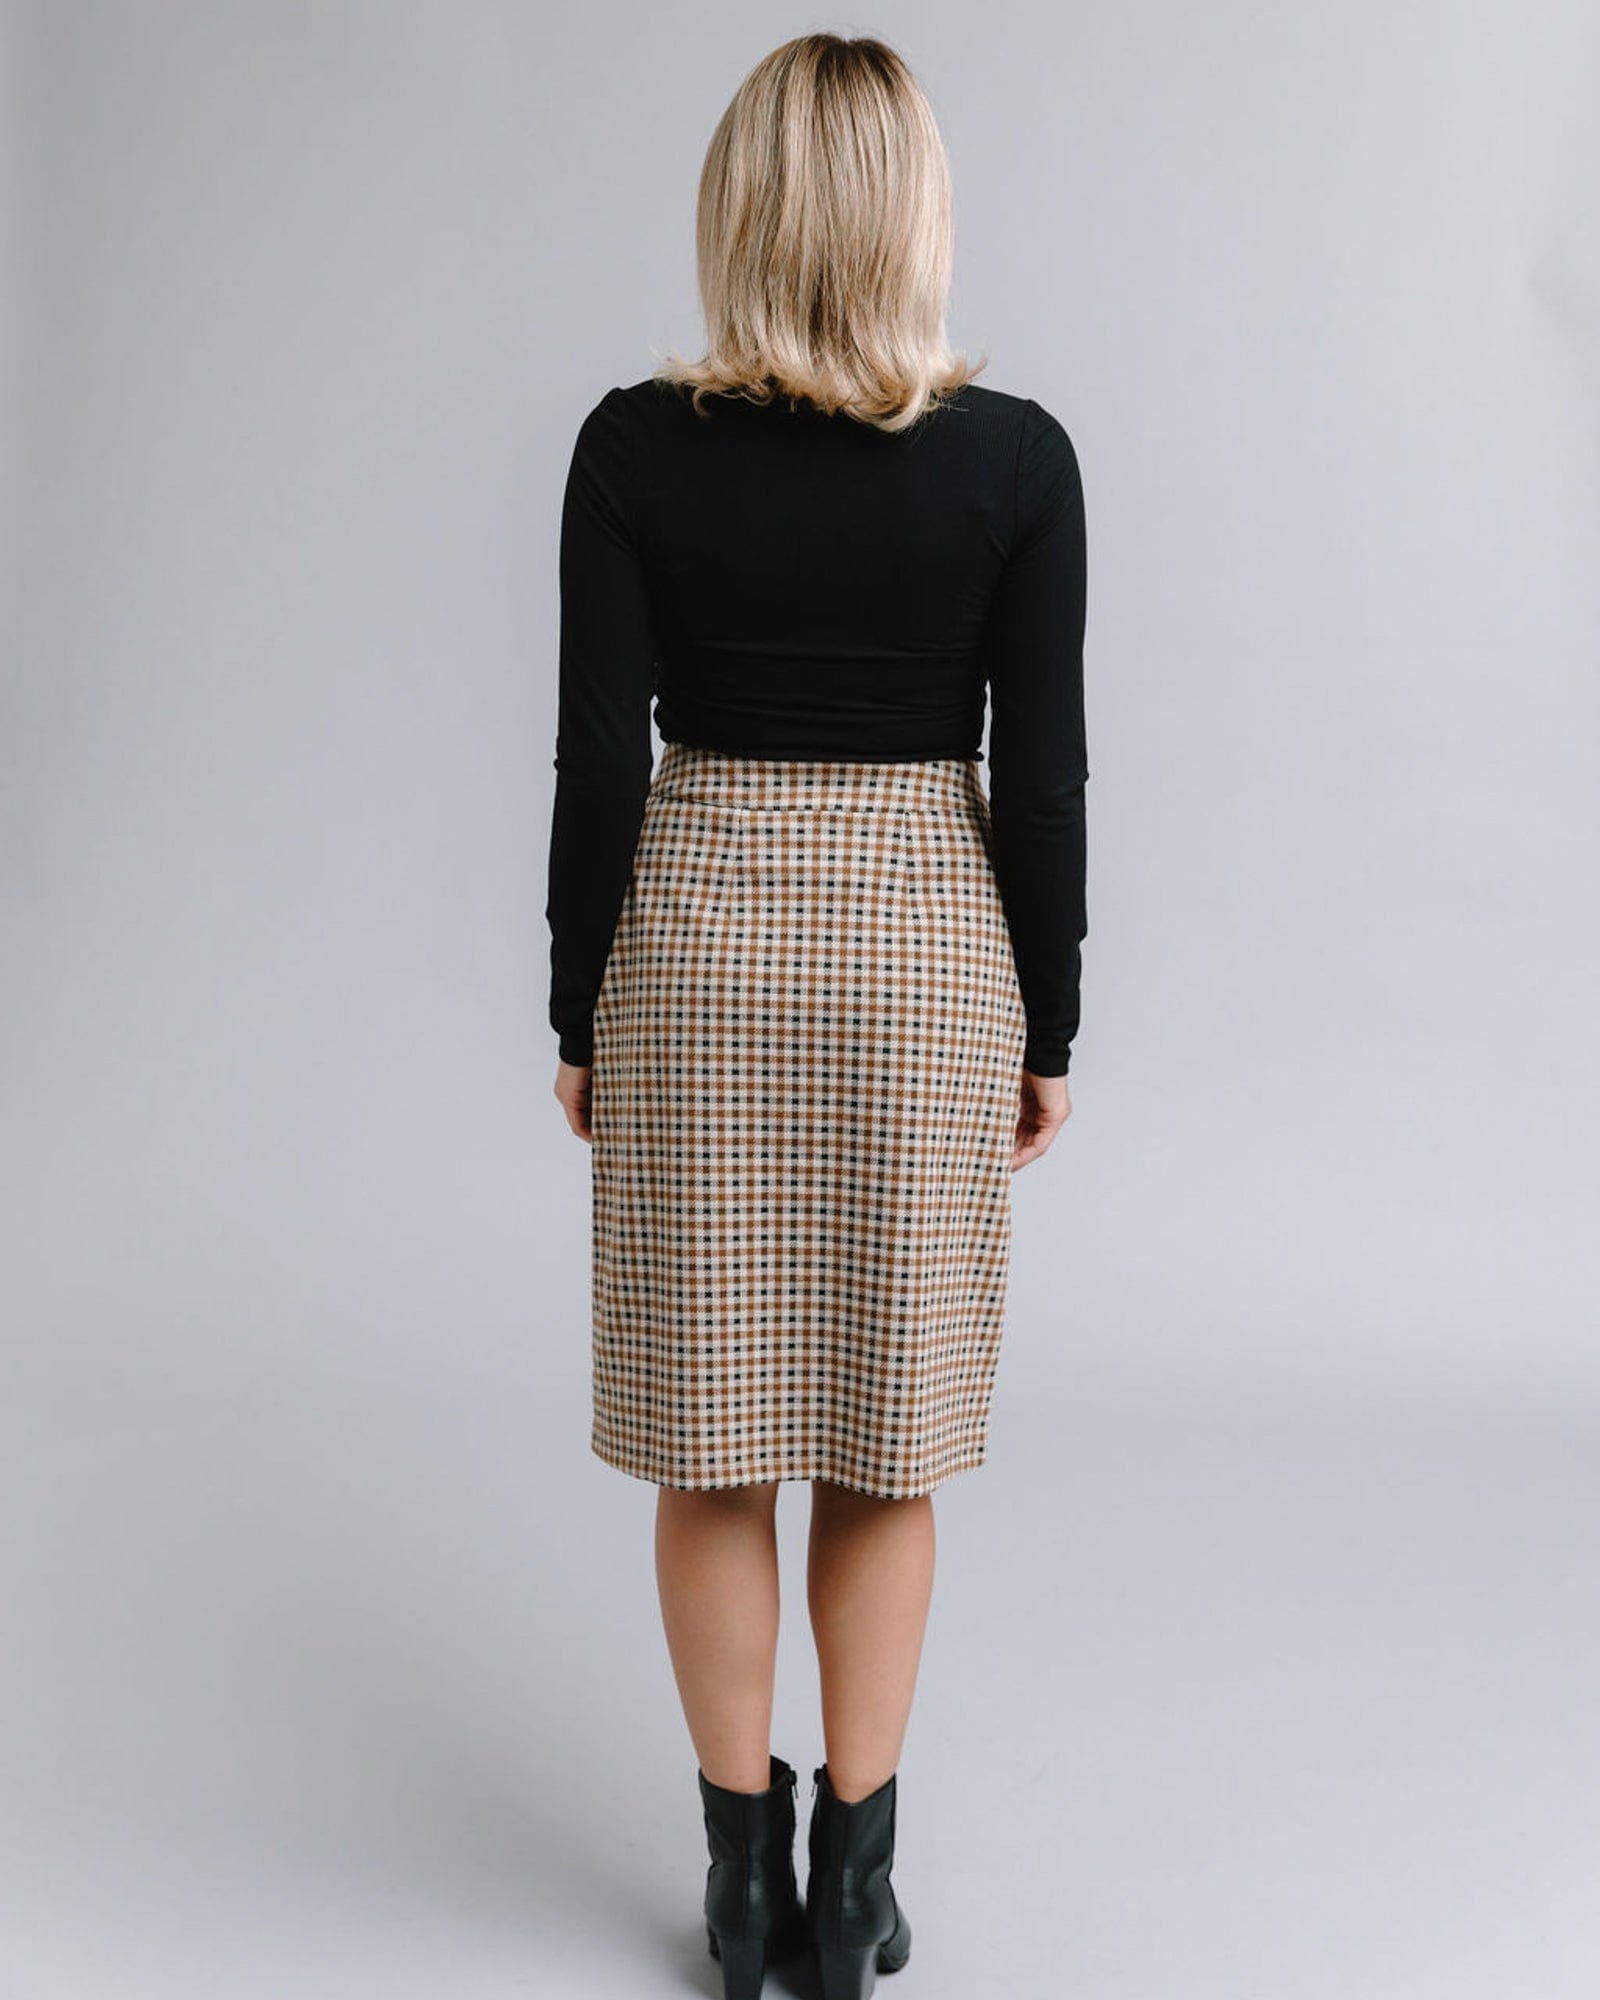 Woman in a knee-length plaid button-down skirt